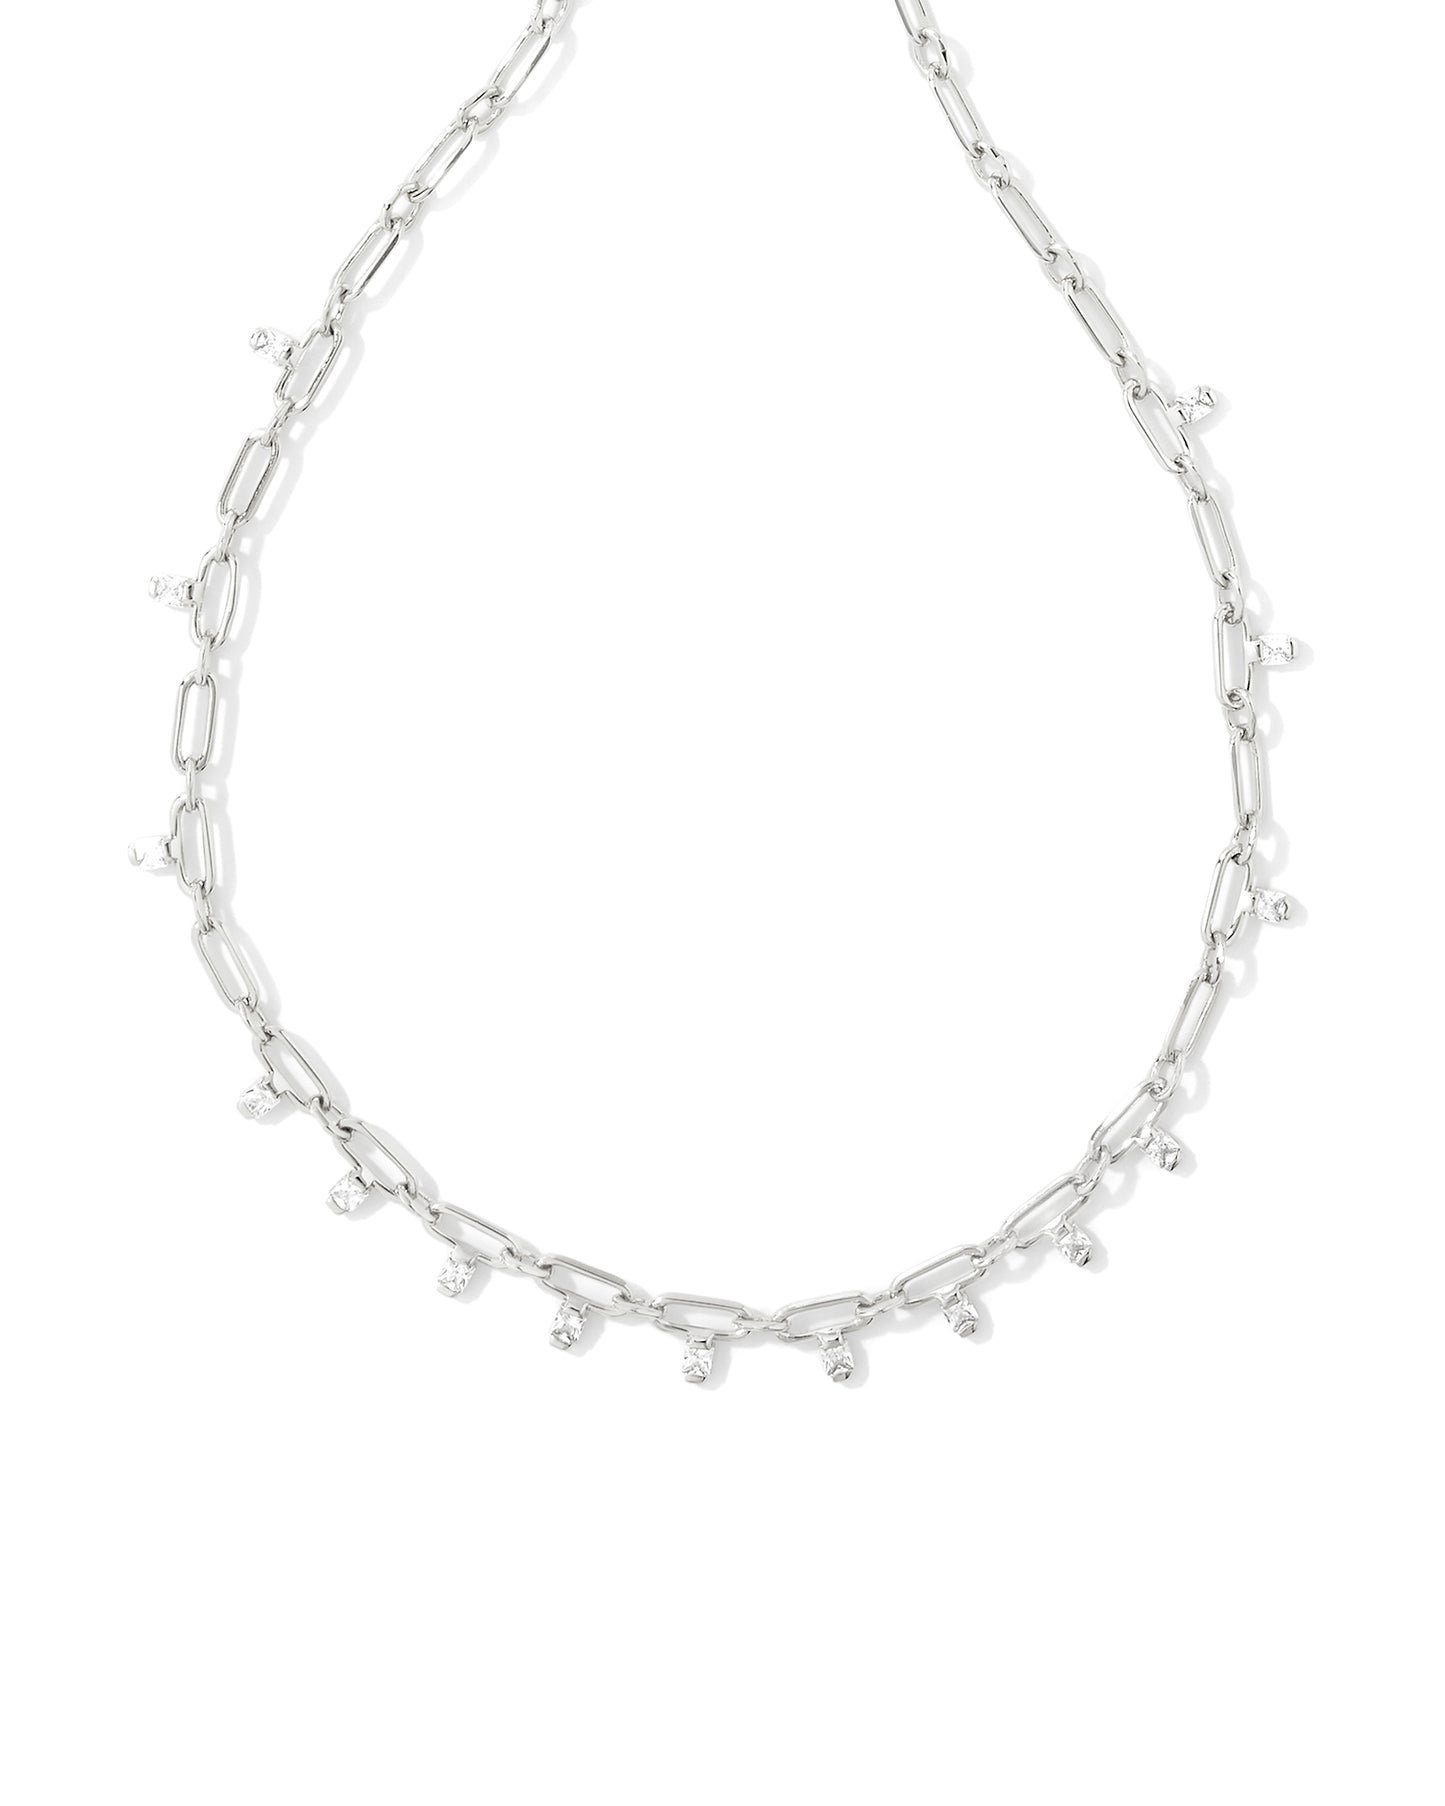 KENDRA SCOTT: LINDY CRYSTAL CHAIN NECKLACE